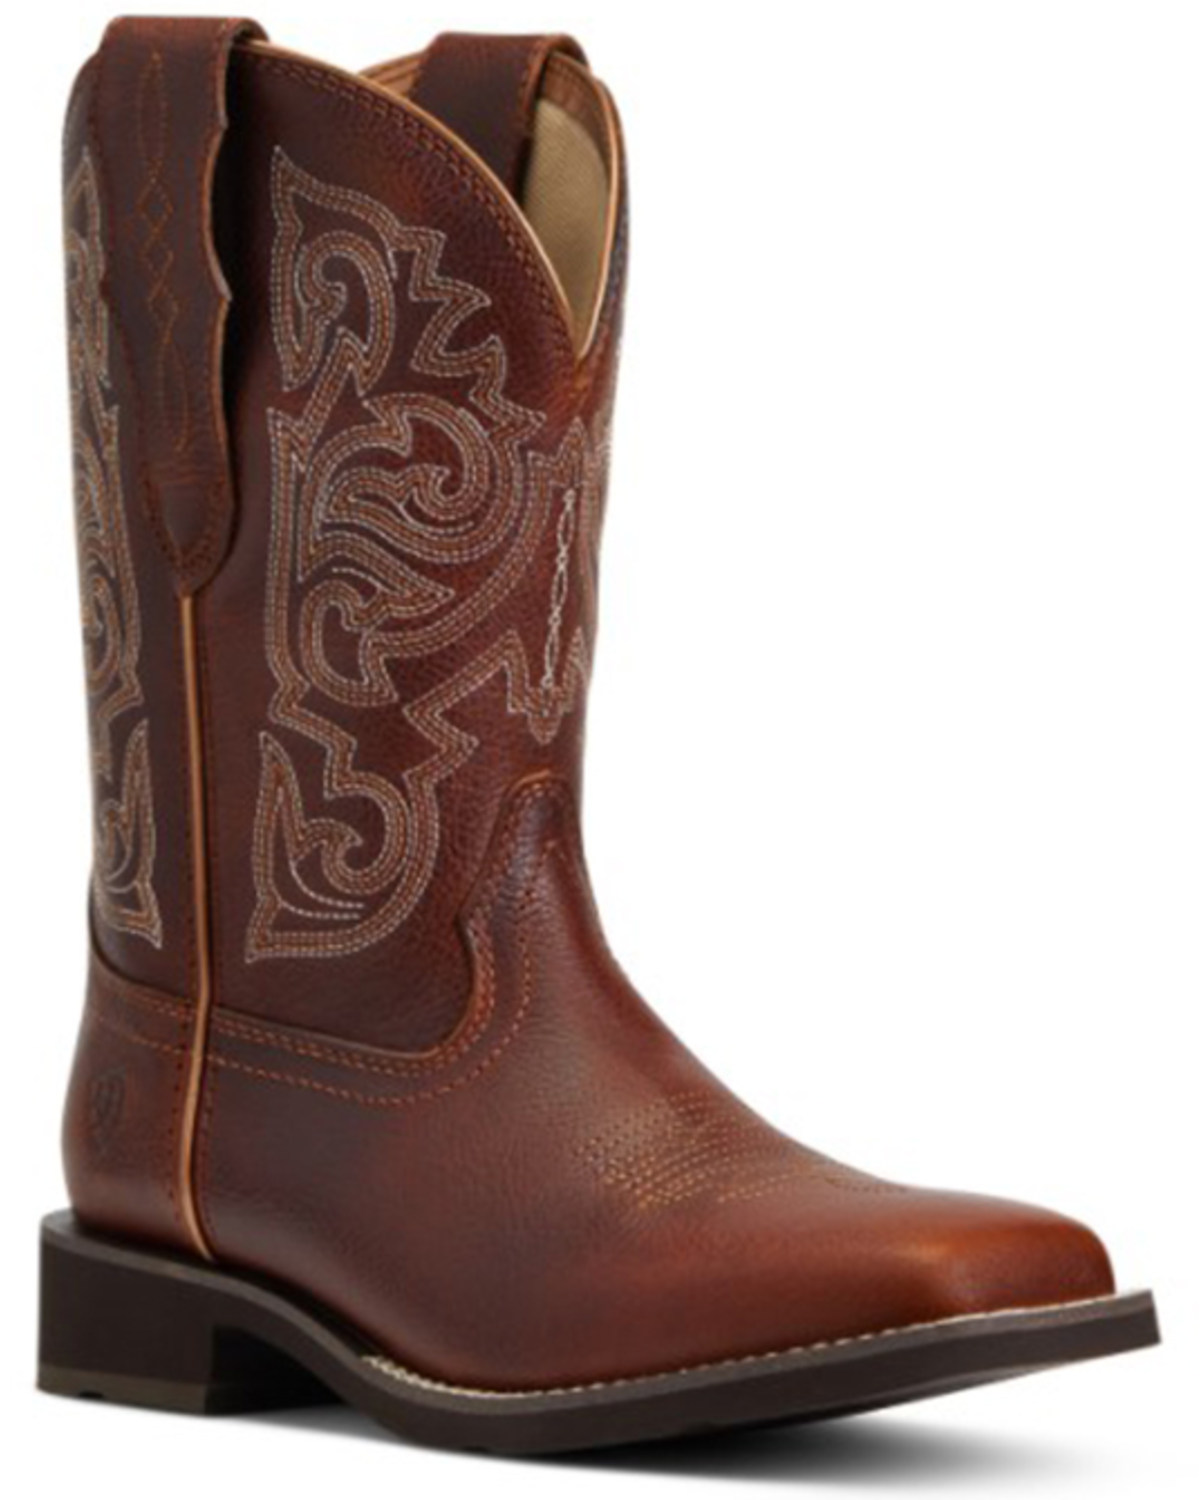 Ariat Women's Delilah Western Performance Boots - Broad Square Toe